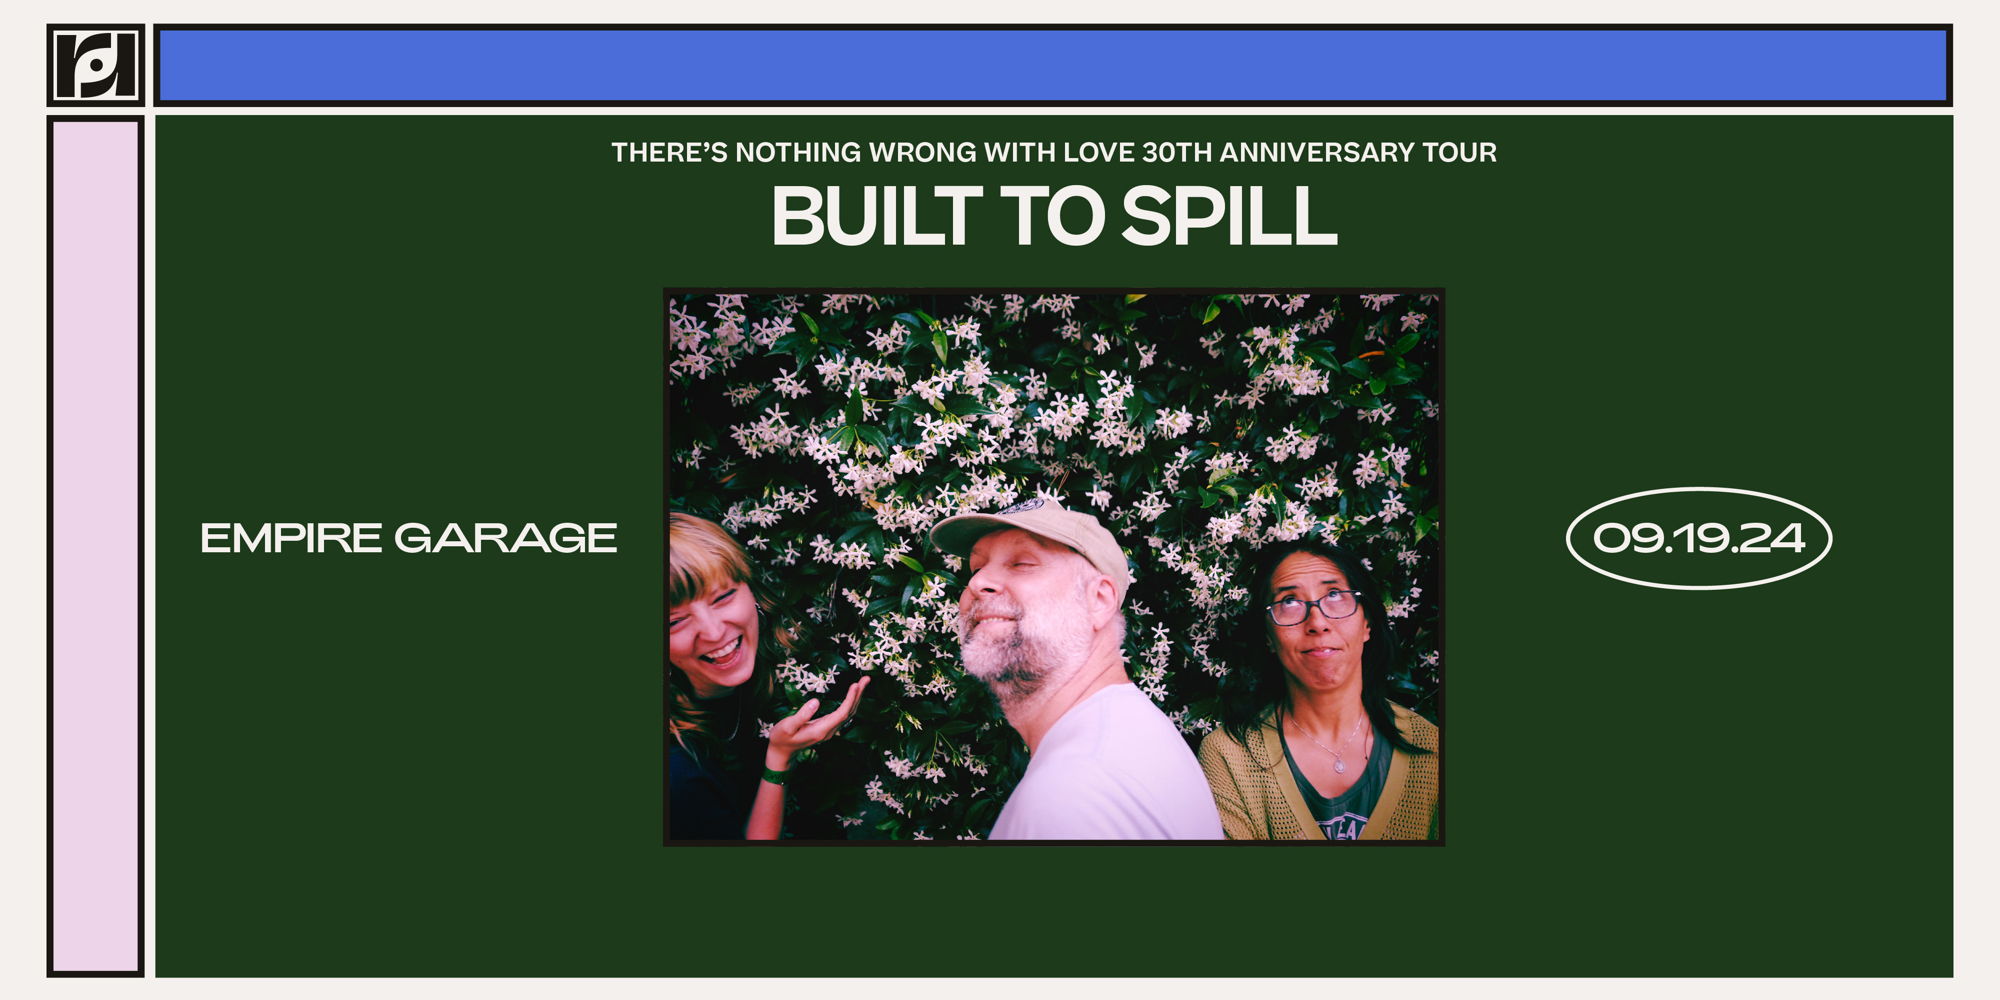 Resound Presents: Built to Spill at The Ballroom  promotional image